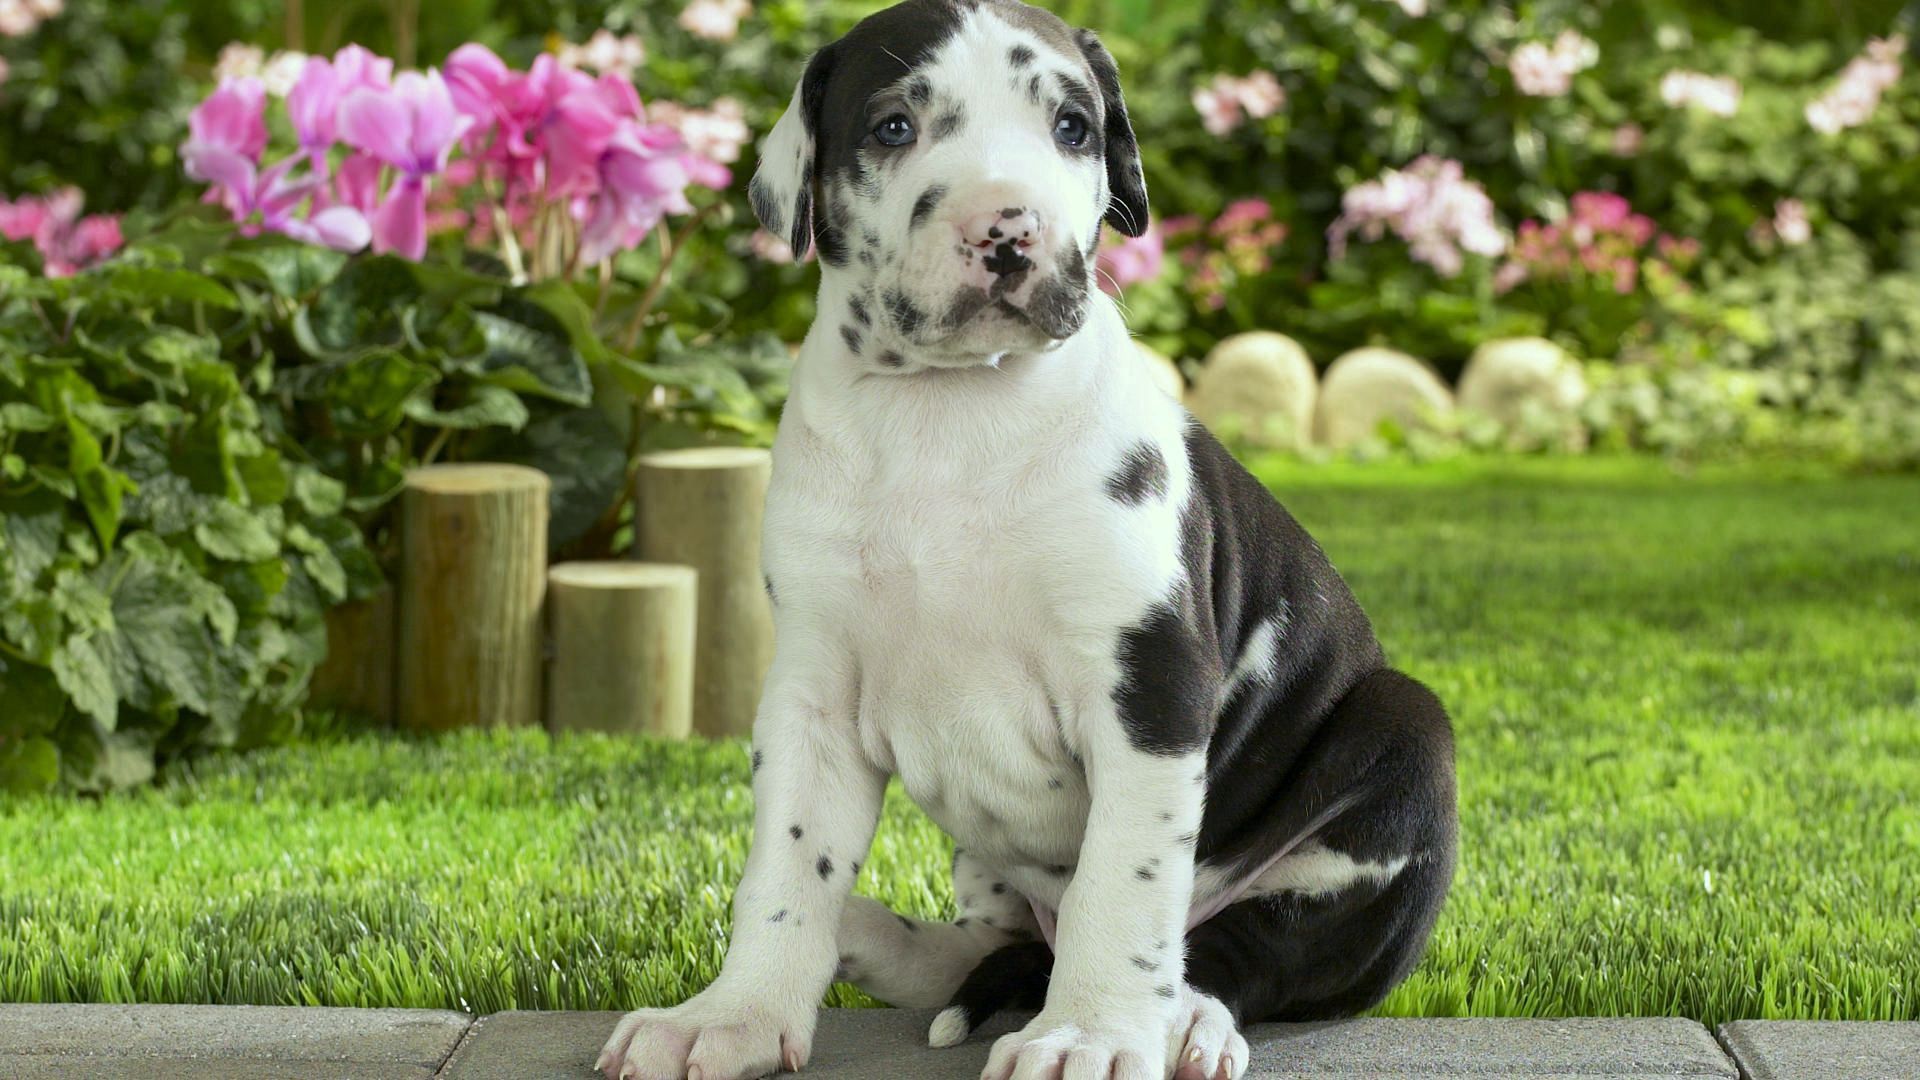 PC Wallpapers animals, flowers, grass, sit, spotted, spotty, puppy